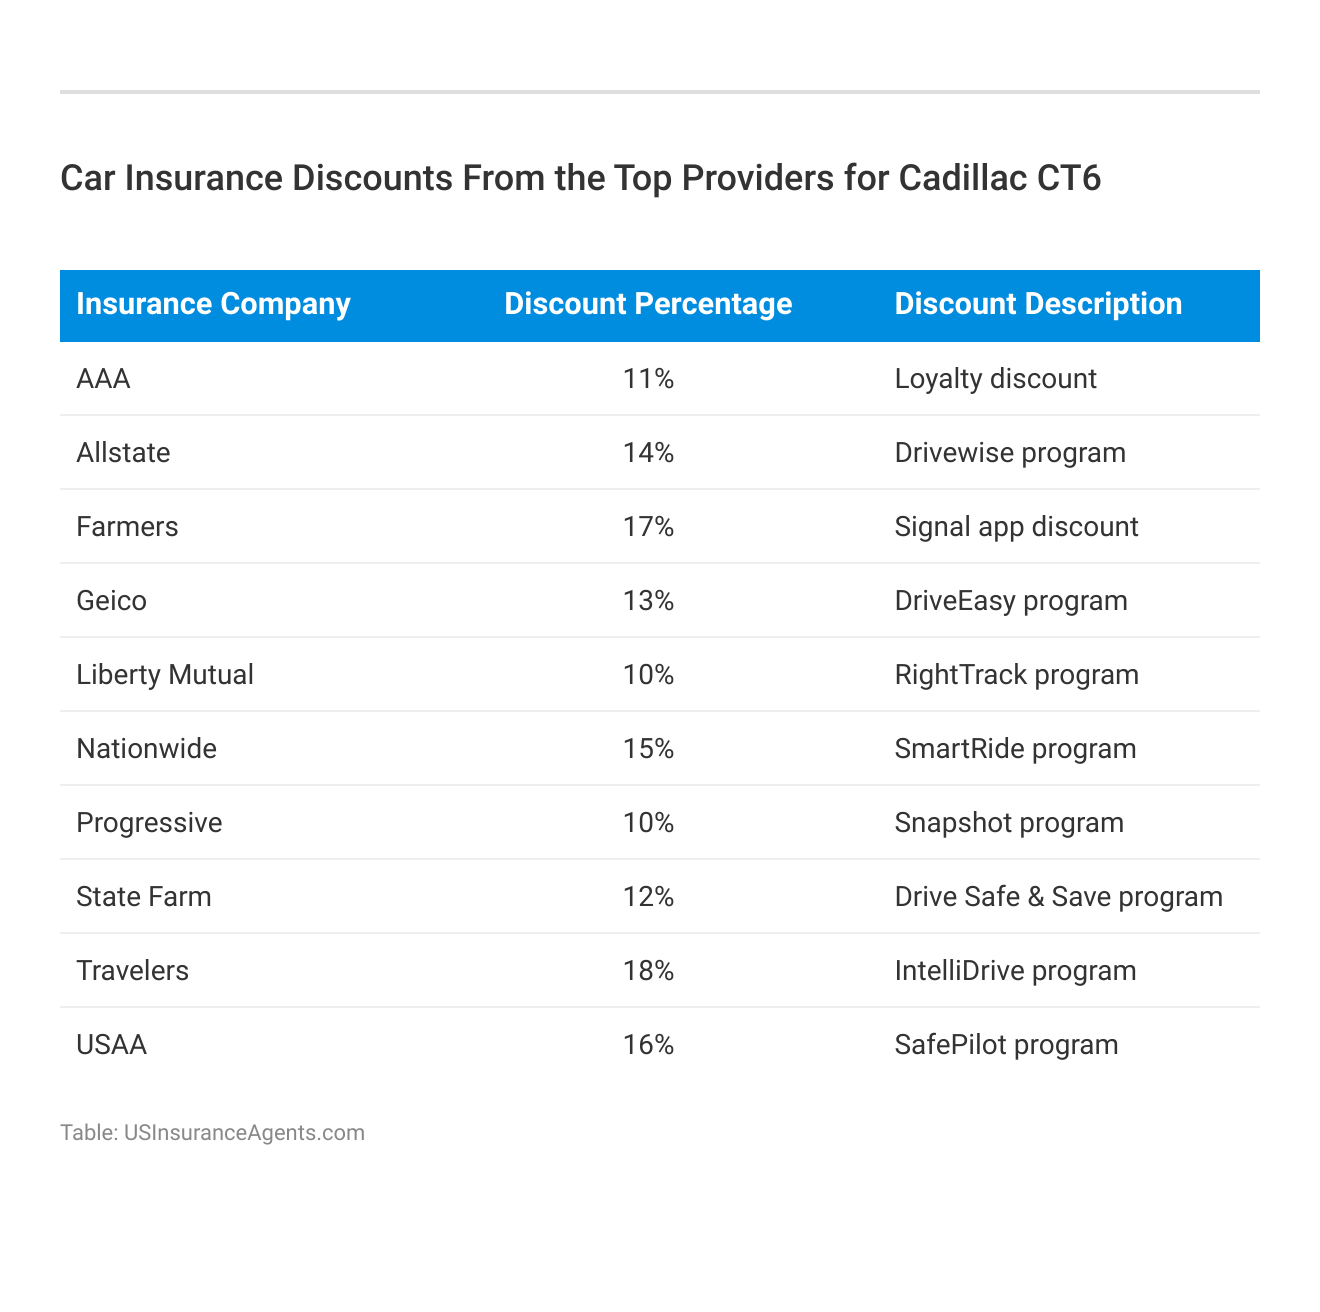 <h3>Car Insurance Discounts From the Top Providers for Cadillac CT6</h3>